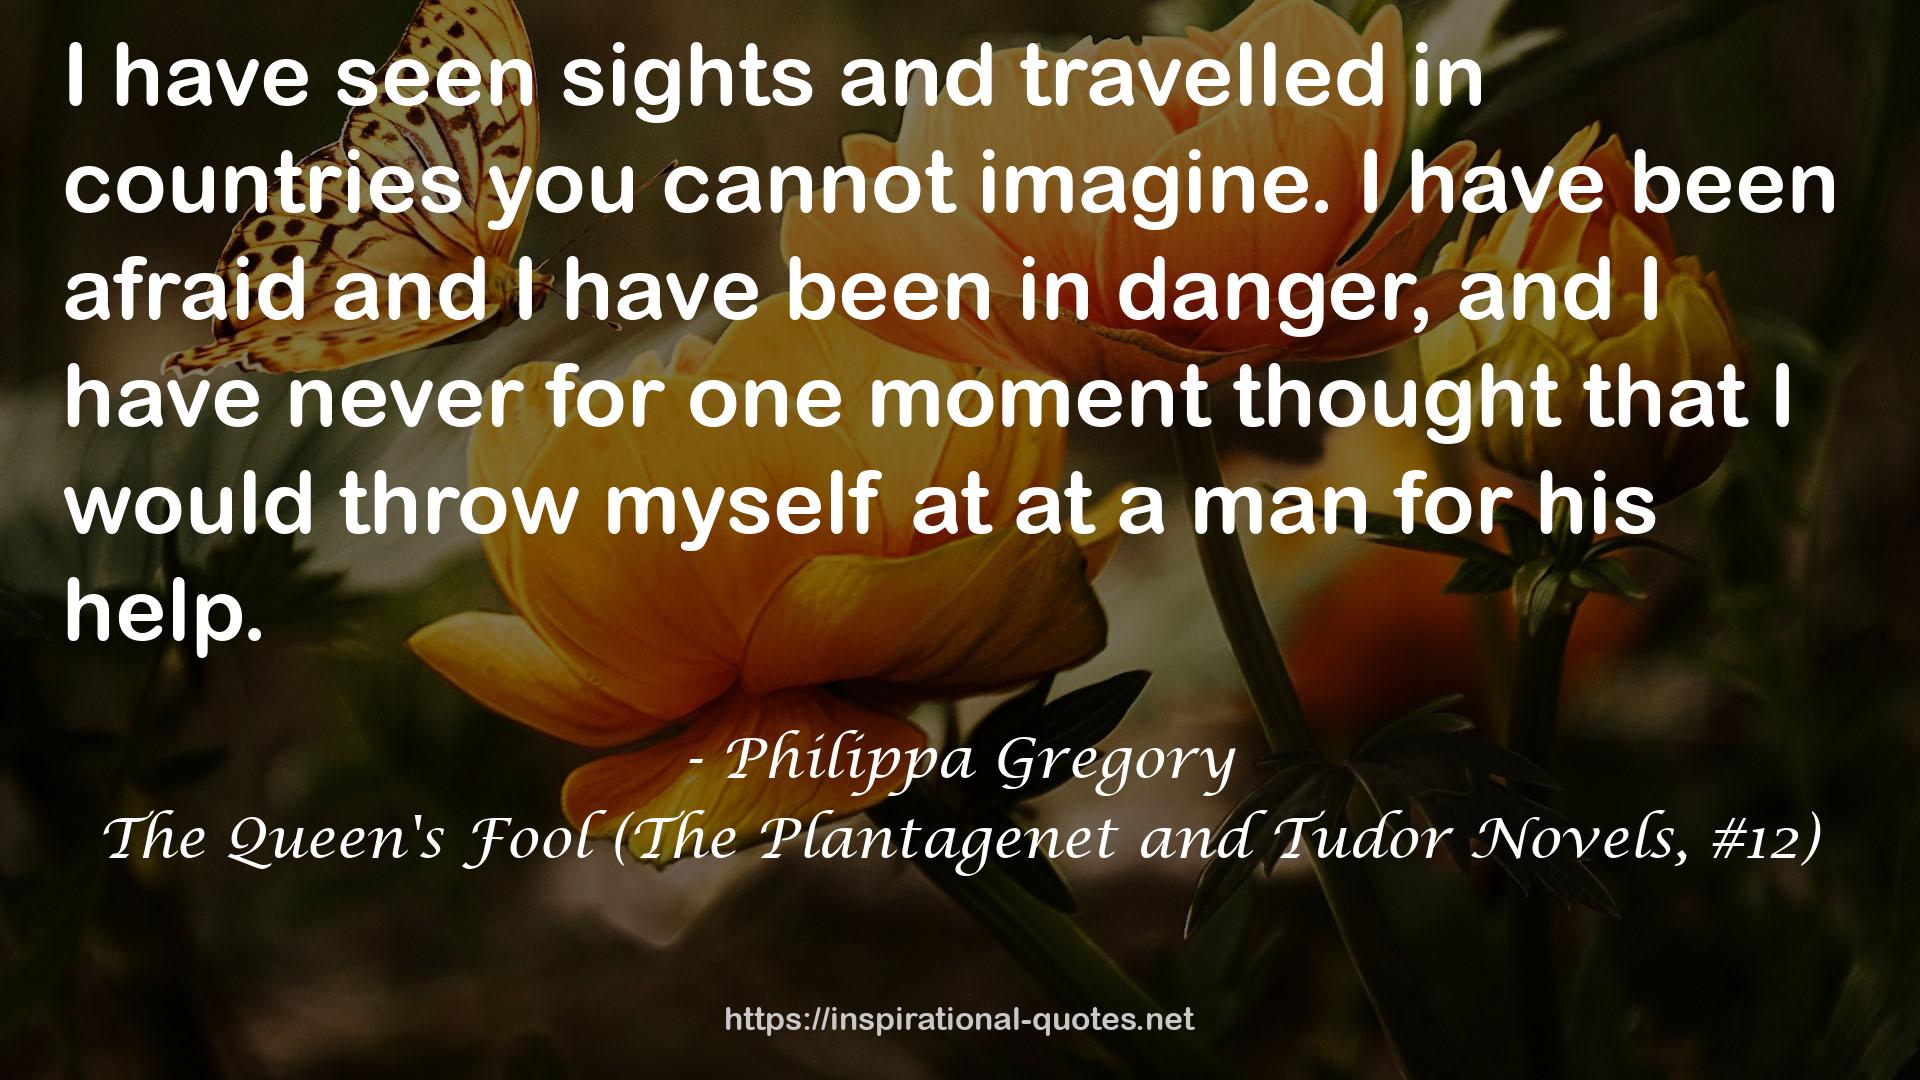 The Queen's Fool (The Plantagenet and Tudor Novels, #12) QUOTES